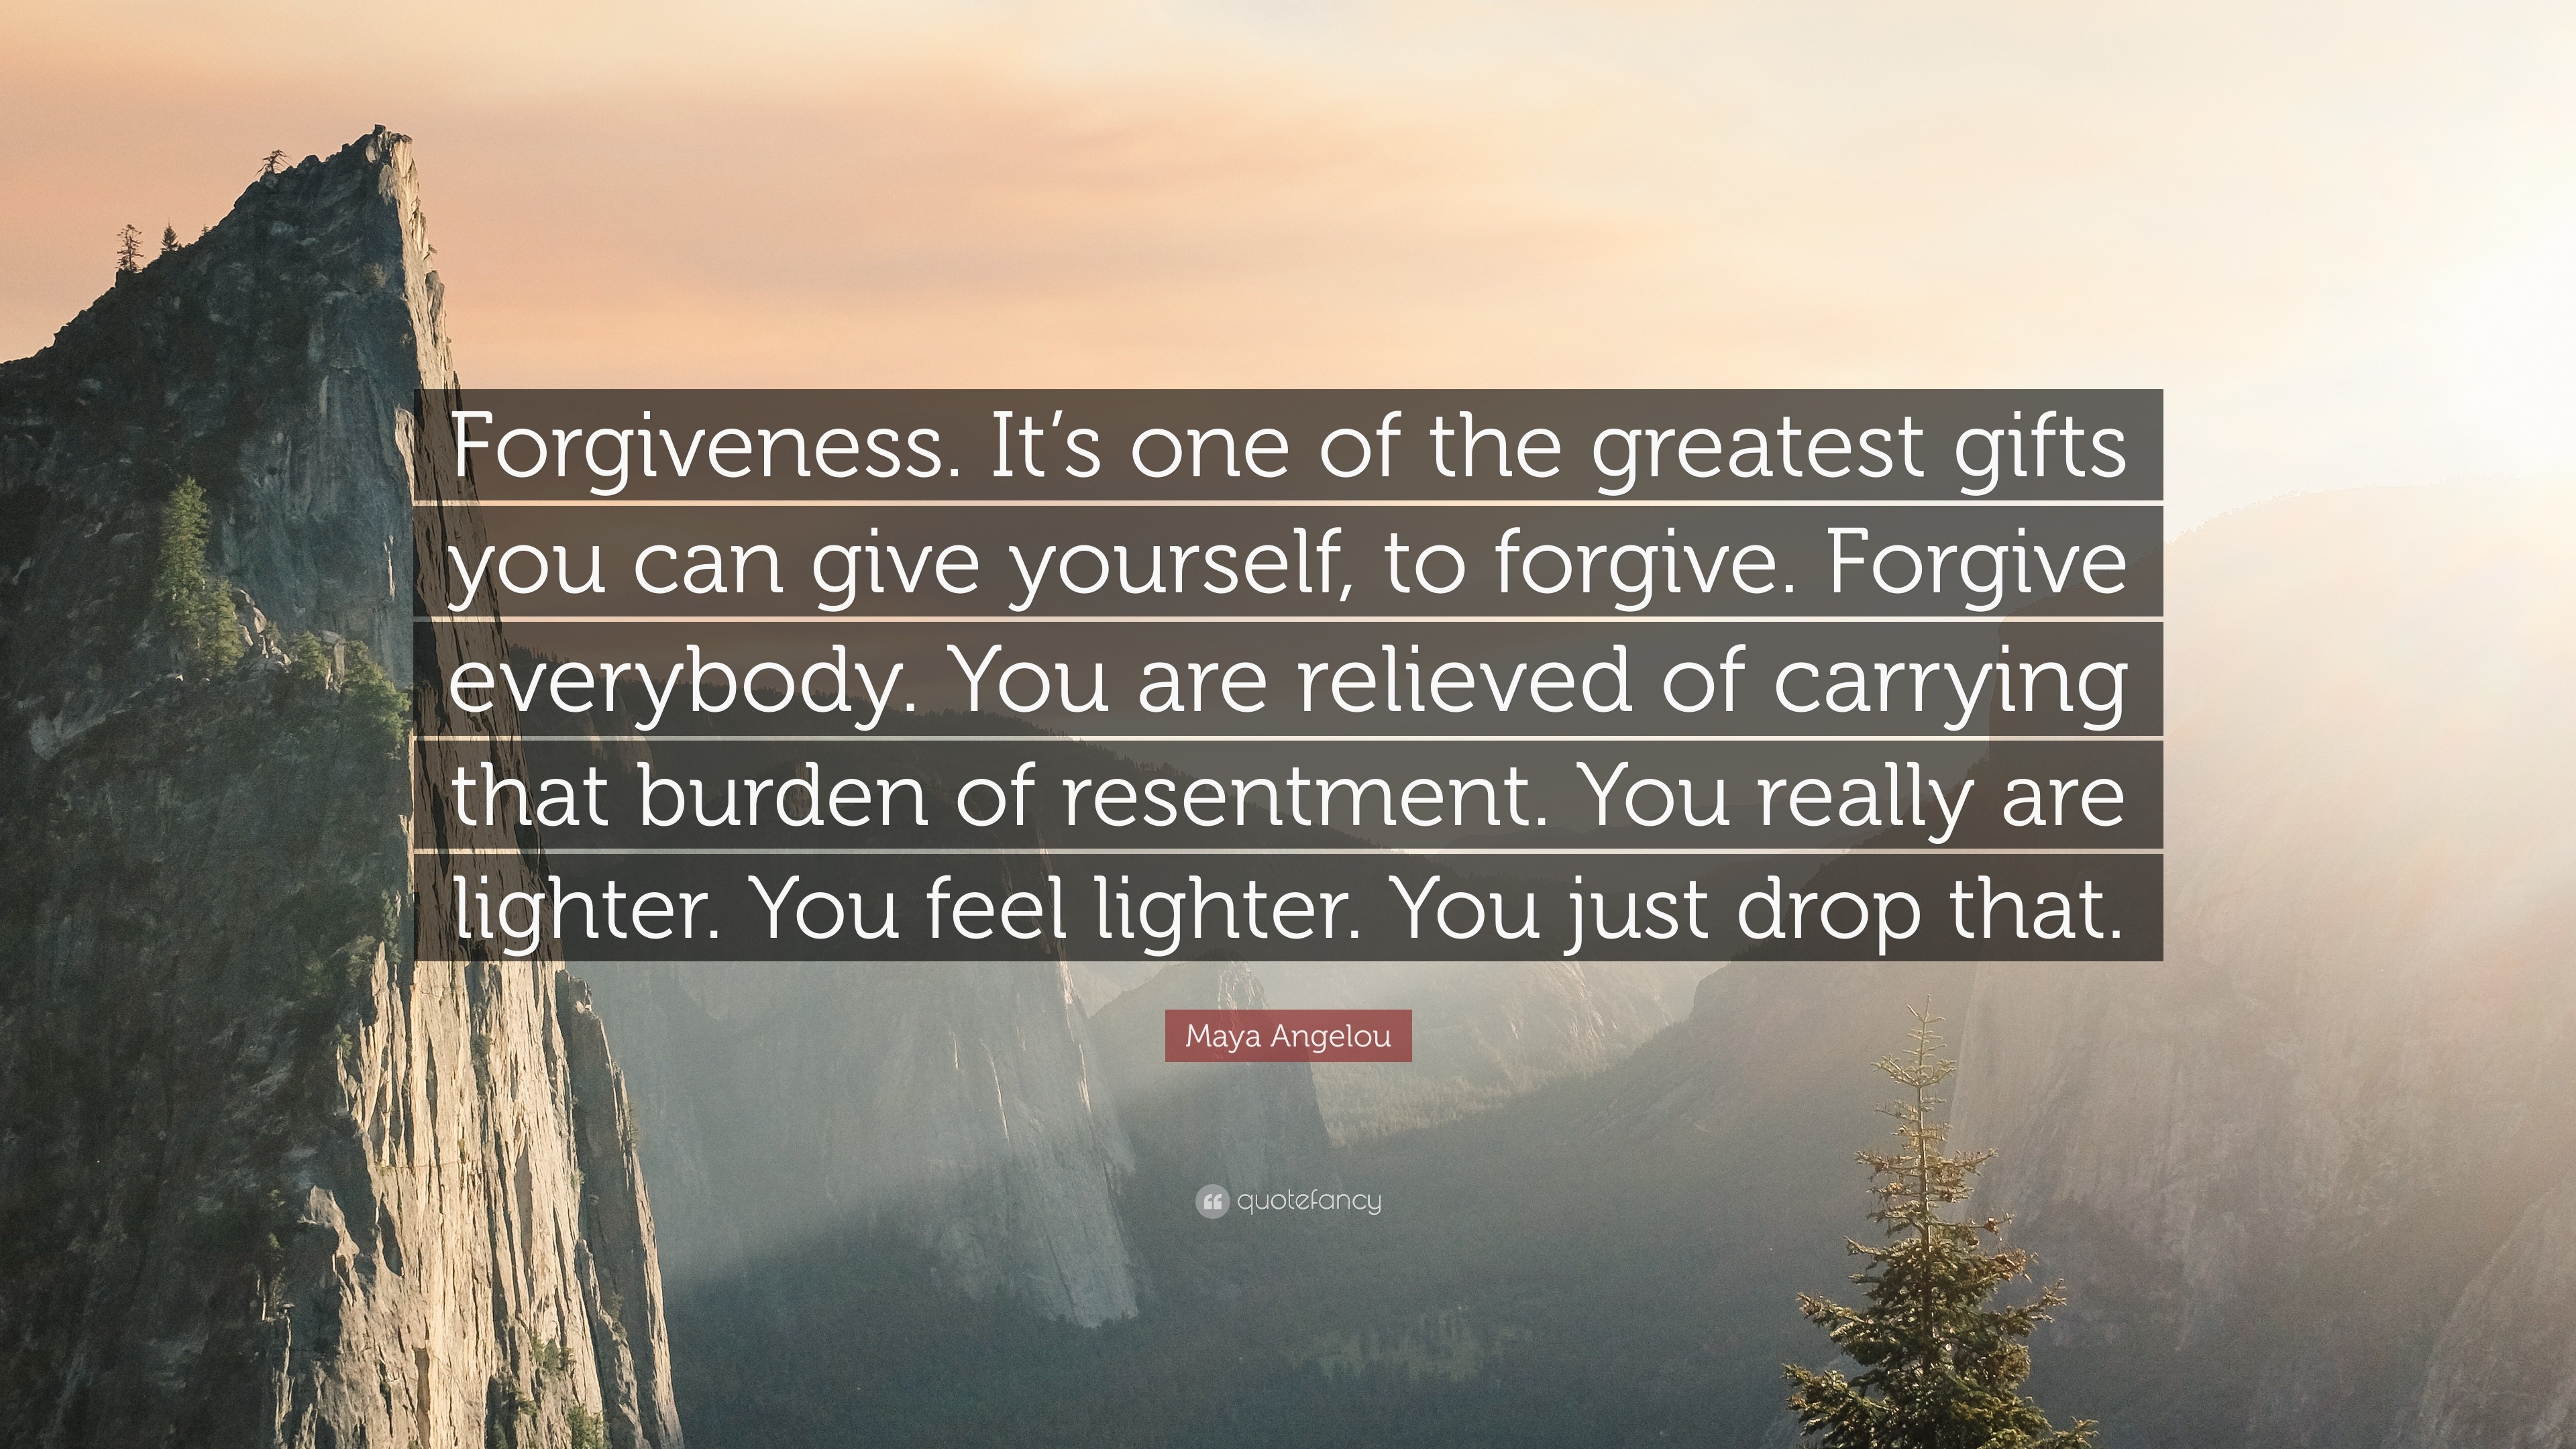 Maya Angelou Quote: “Forgiveness. It’s one of the greatest gifts you ...